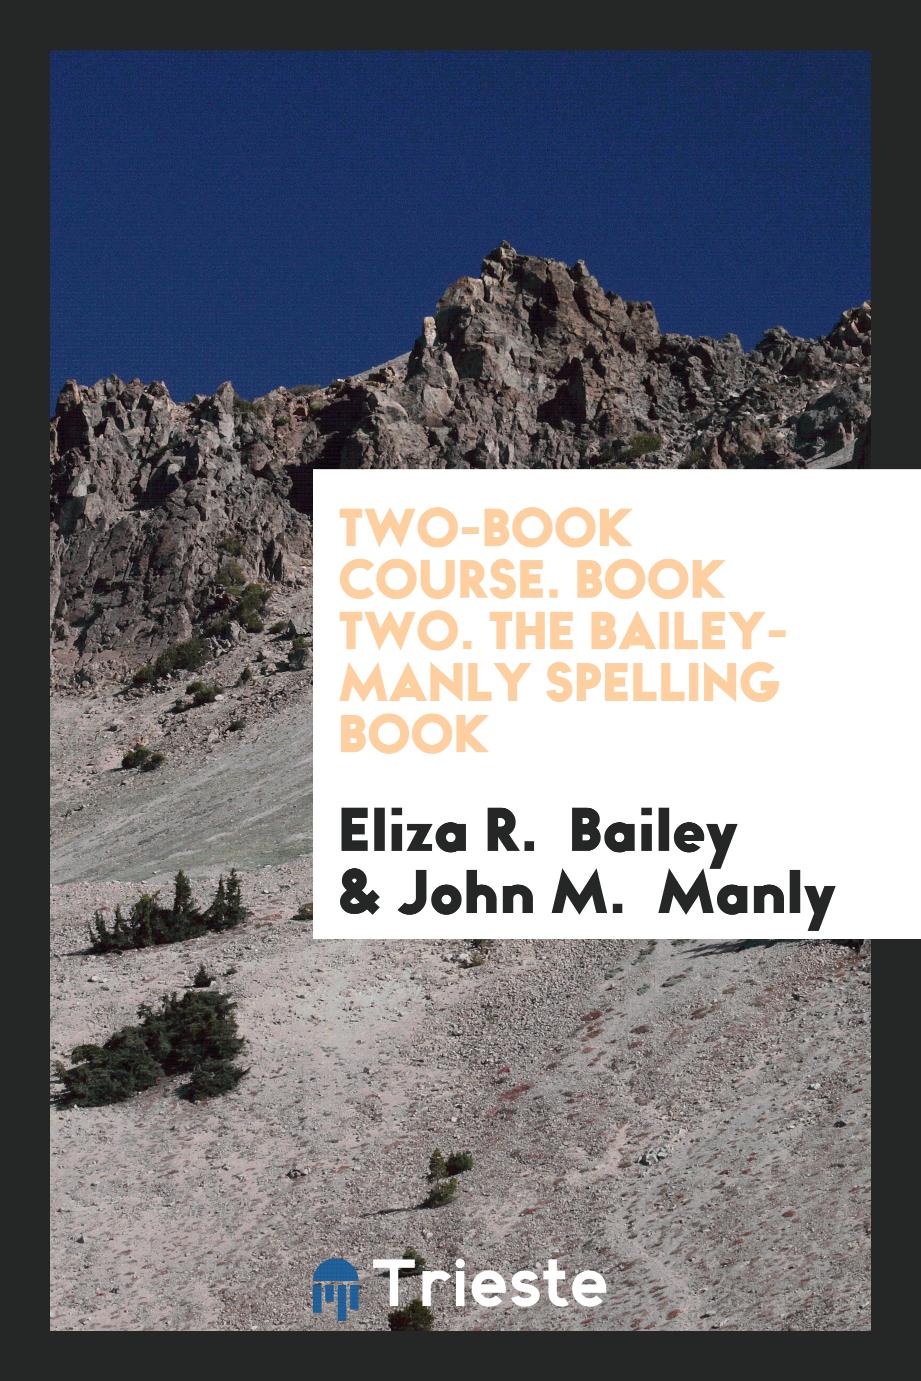 Two-Book Course. Book Two. The Bailey-Manly Spelling Book